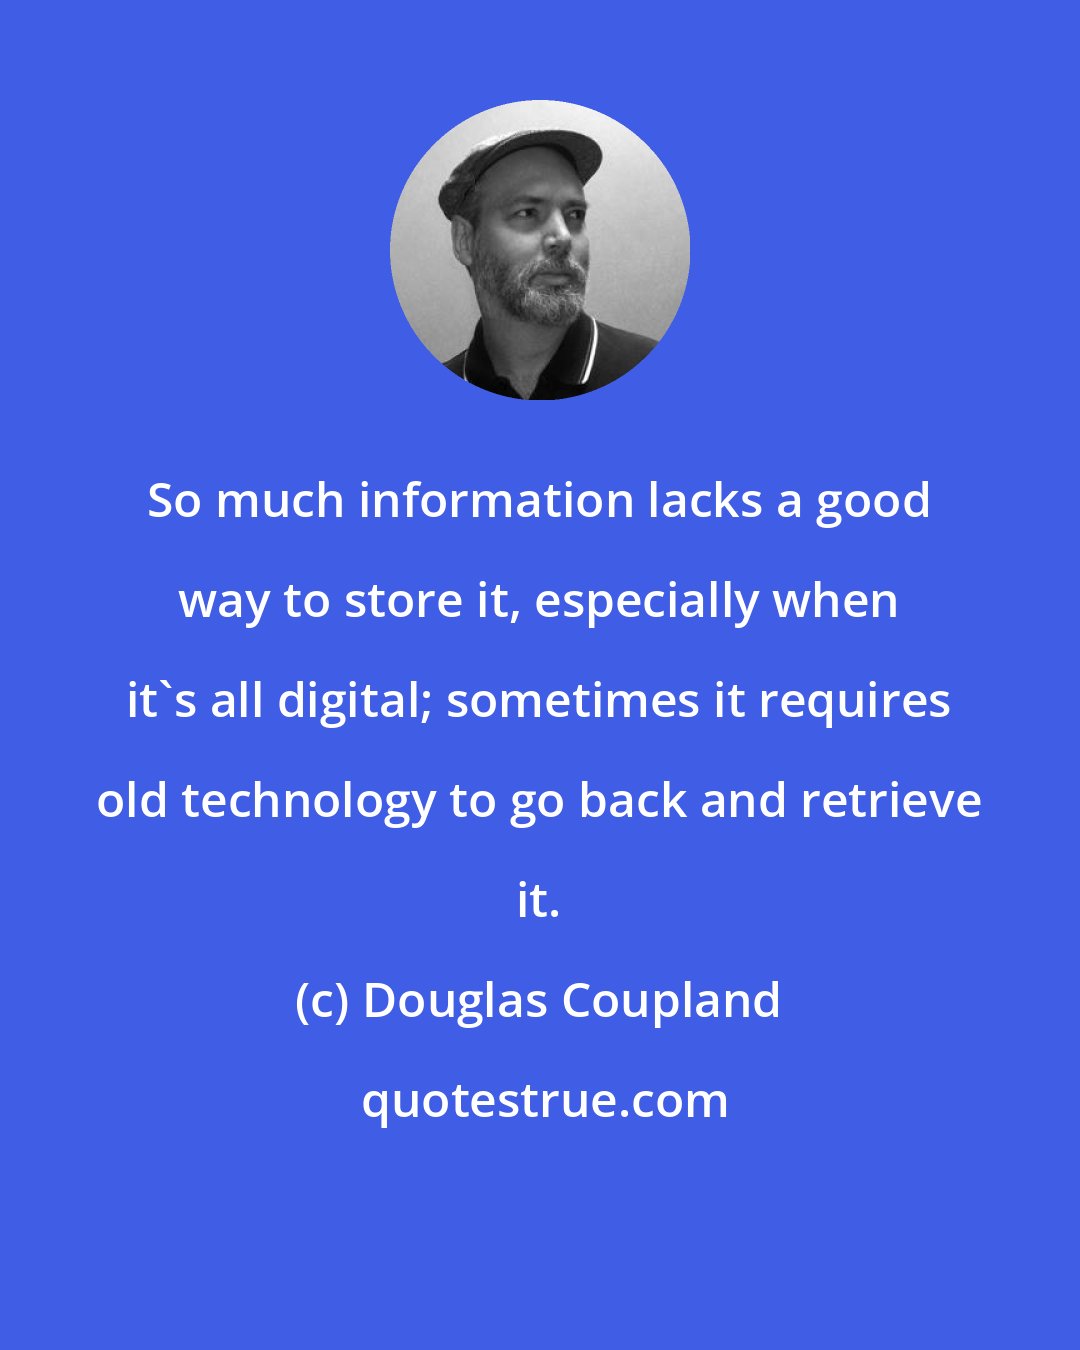 Douglas Coupland: So much information lacks a good way to store it, especially when it's all digital; sometimes it requires old technology to go back and retrieve it.